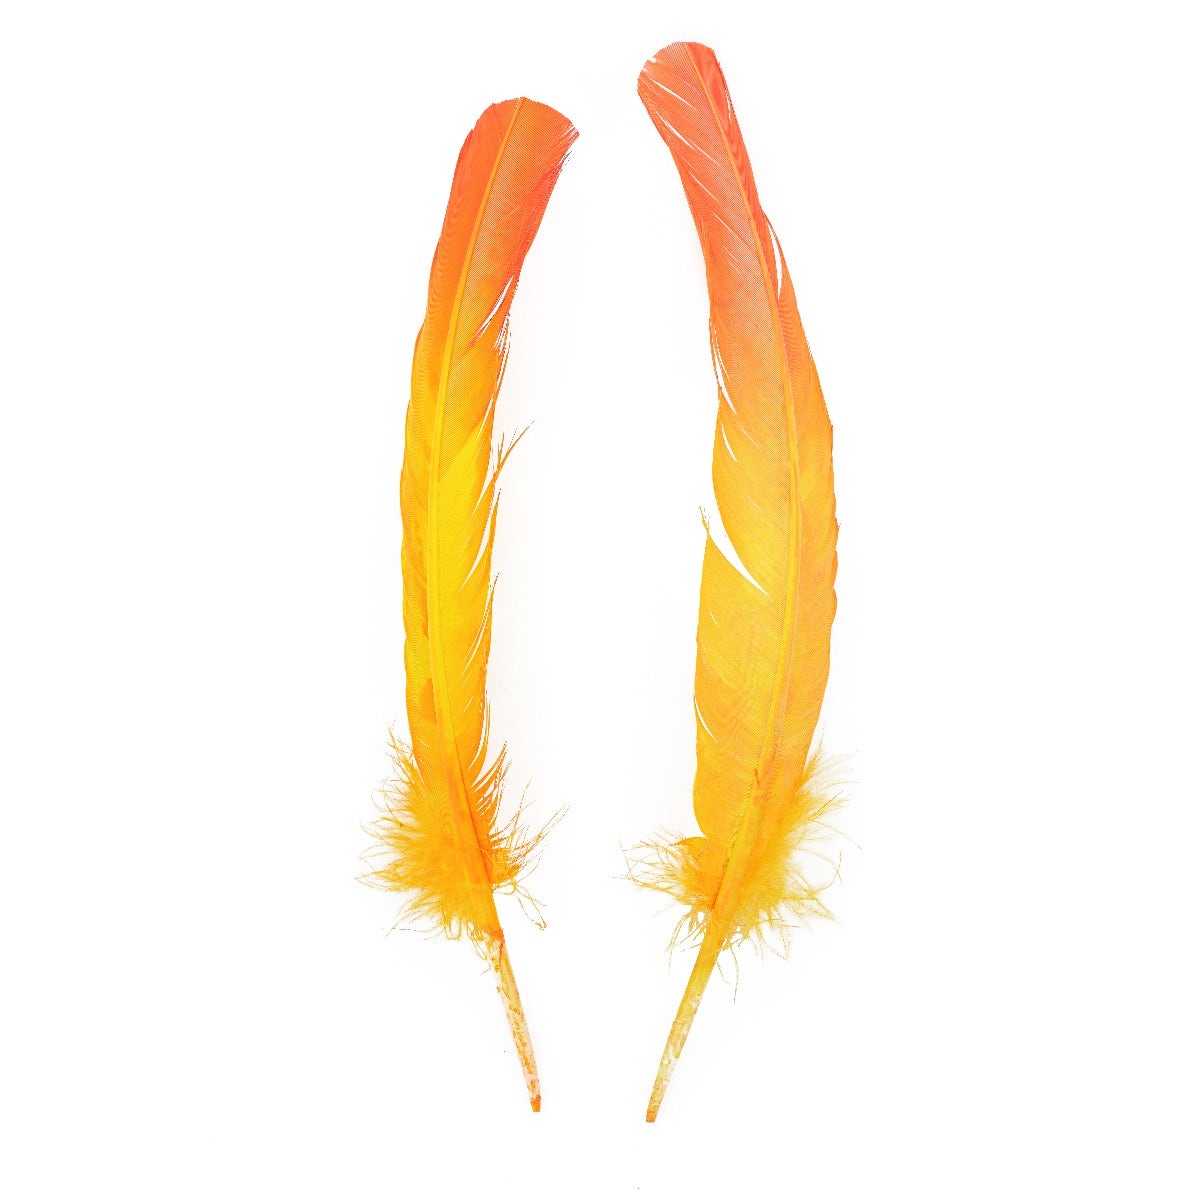 Ombré Turkey Quill Feathers 10-12” 2 pc - Pink Orient-Gold